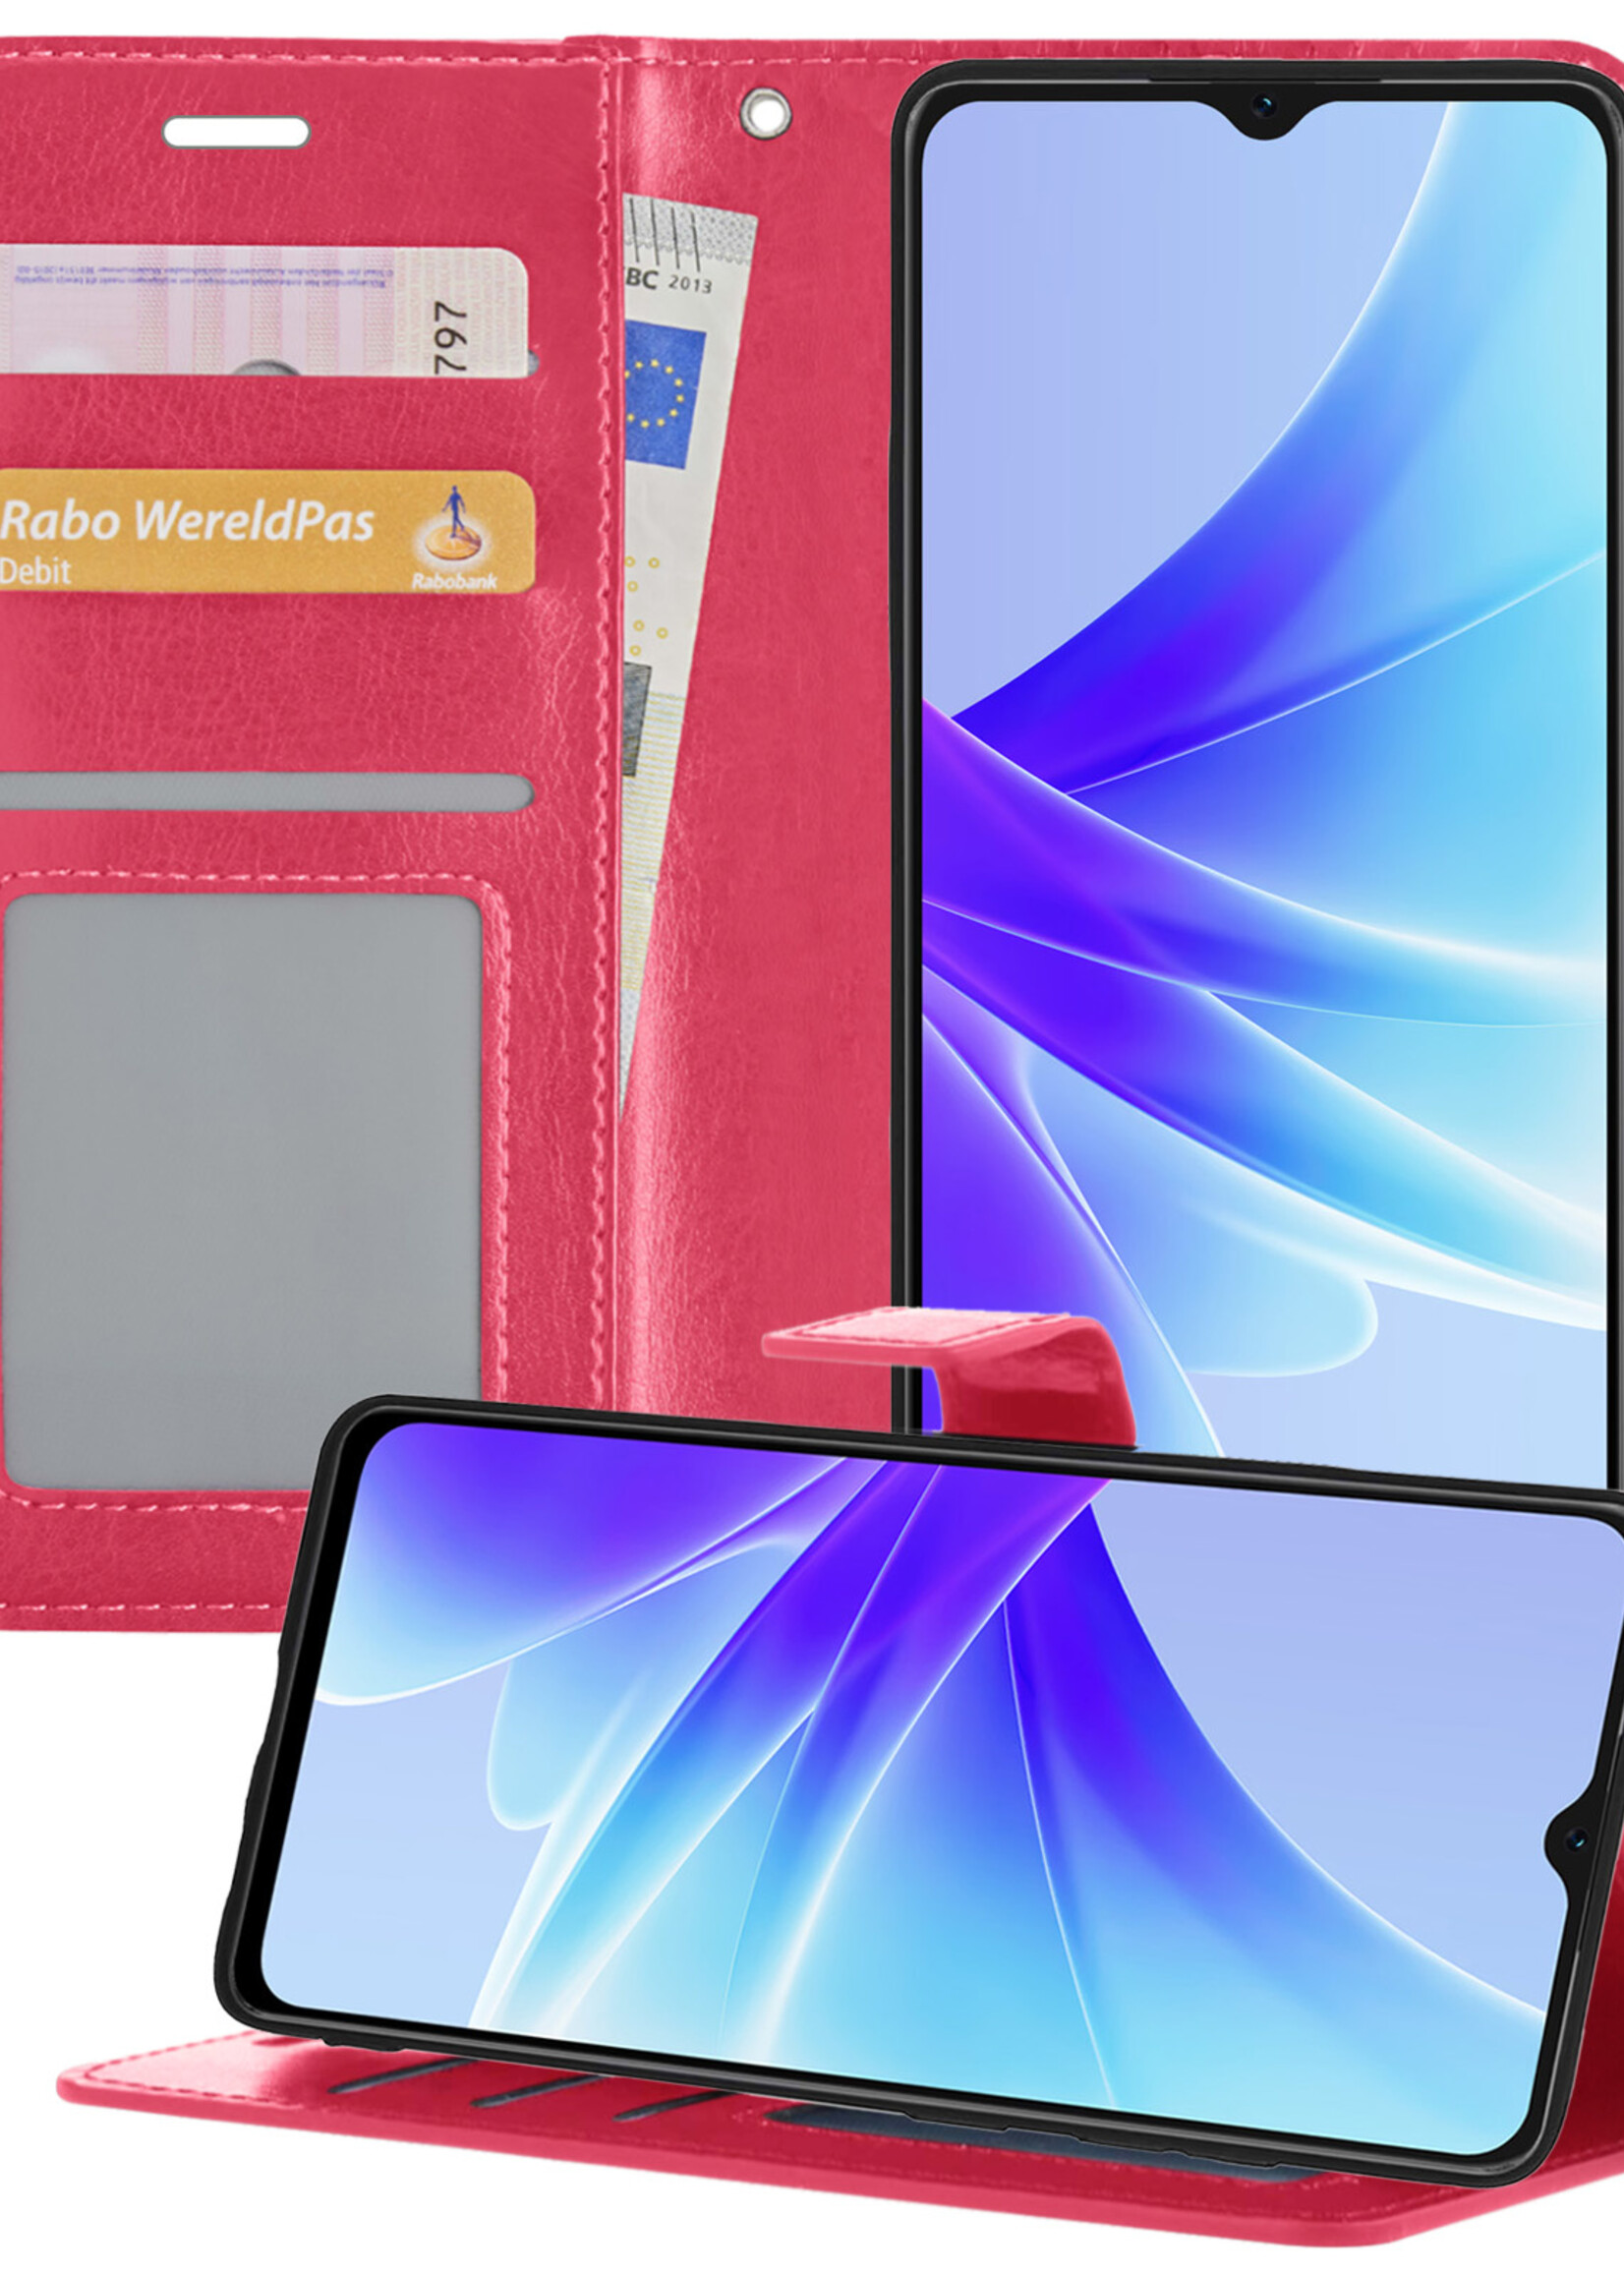 BTH OPPO A57 Hoesje Book Case Hoes Portemonnee Cover Walletcase - OPPO A57 Hoes Bookcase Hoesje - Donkerroze